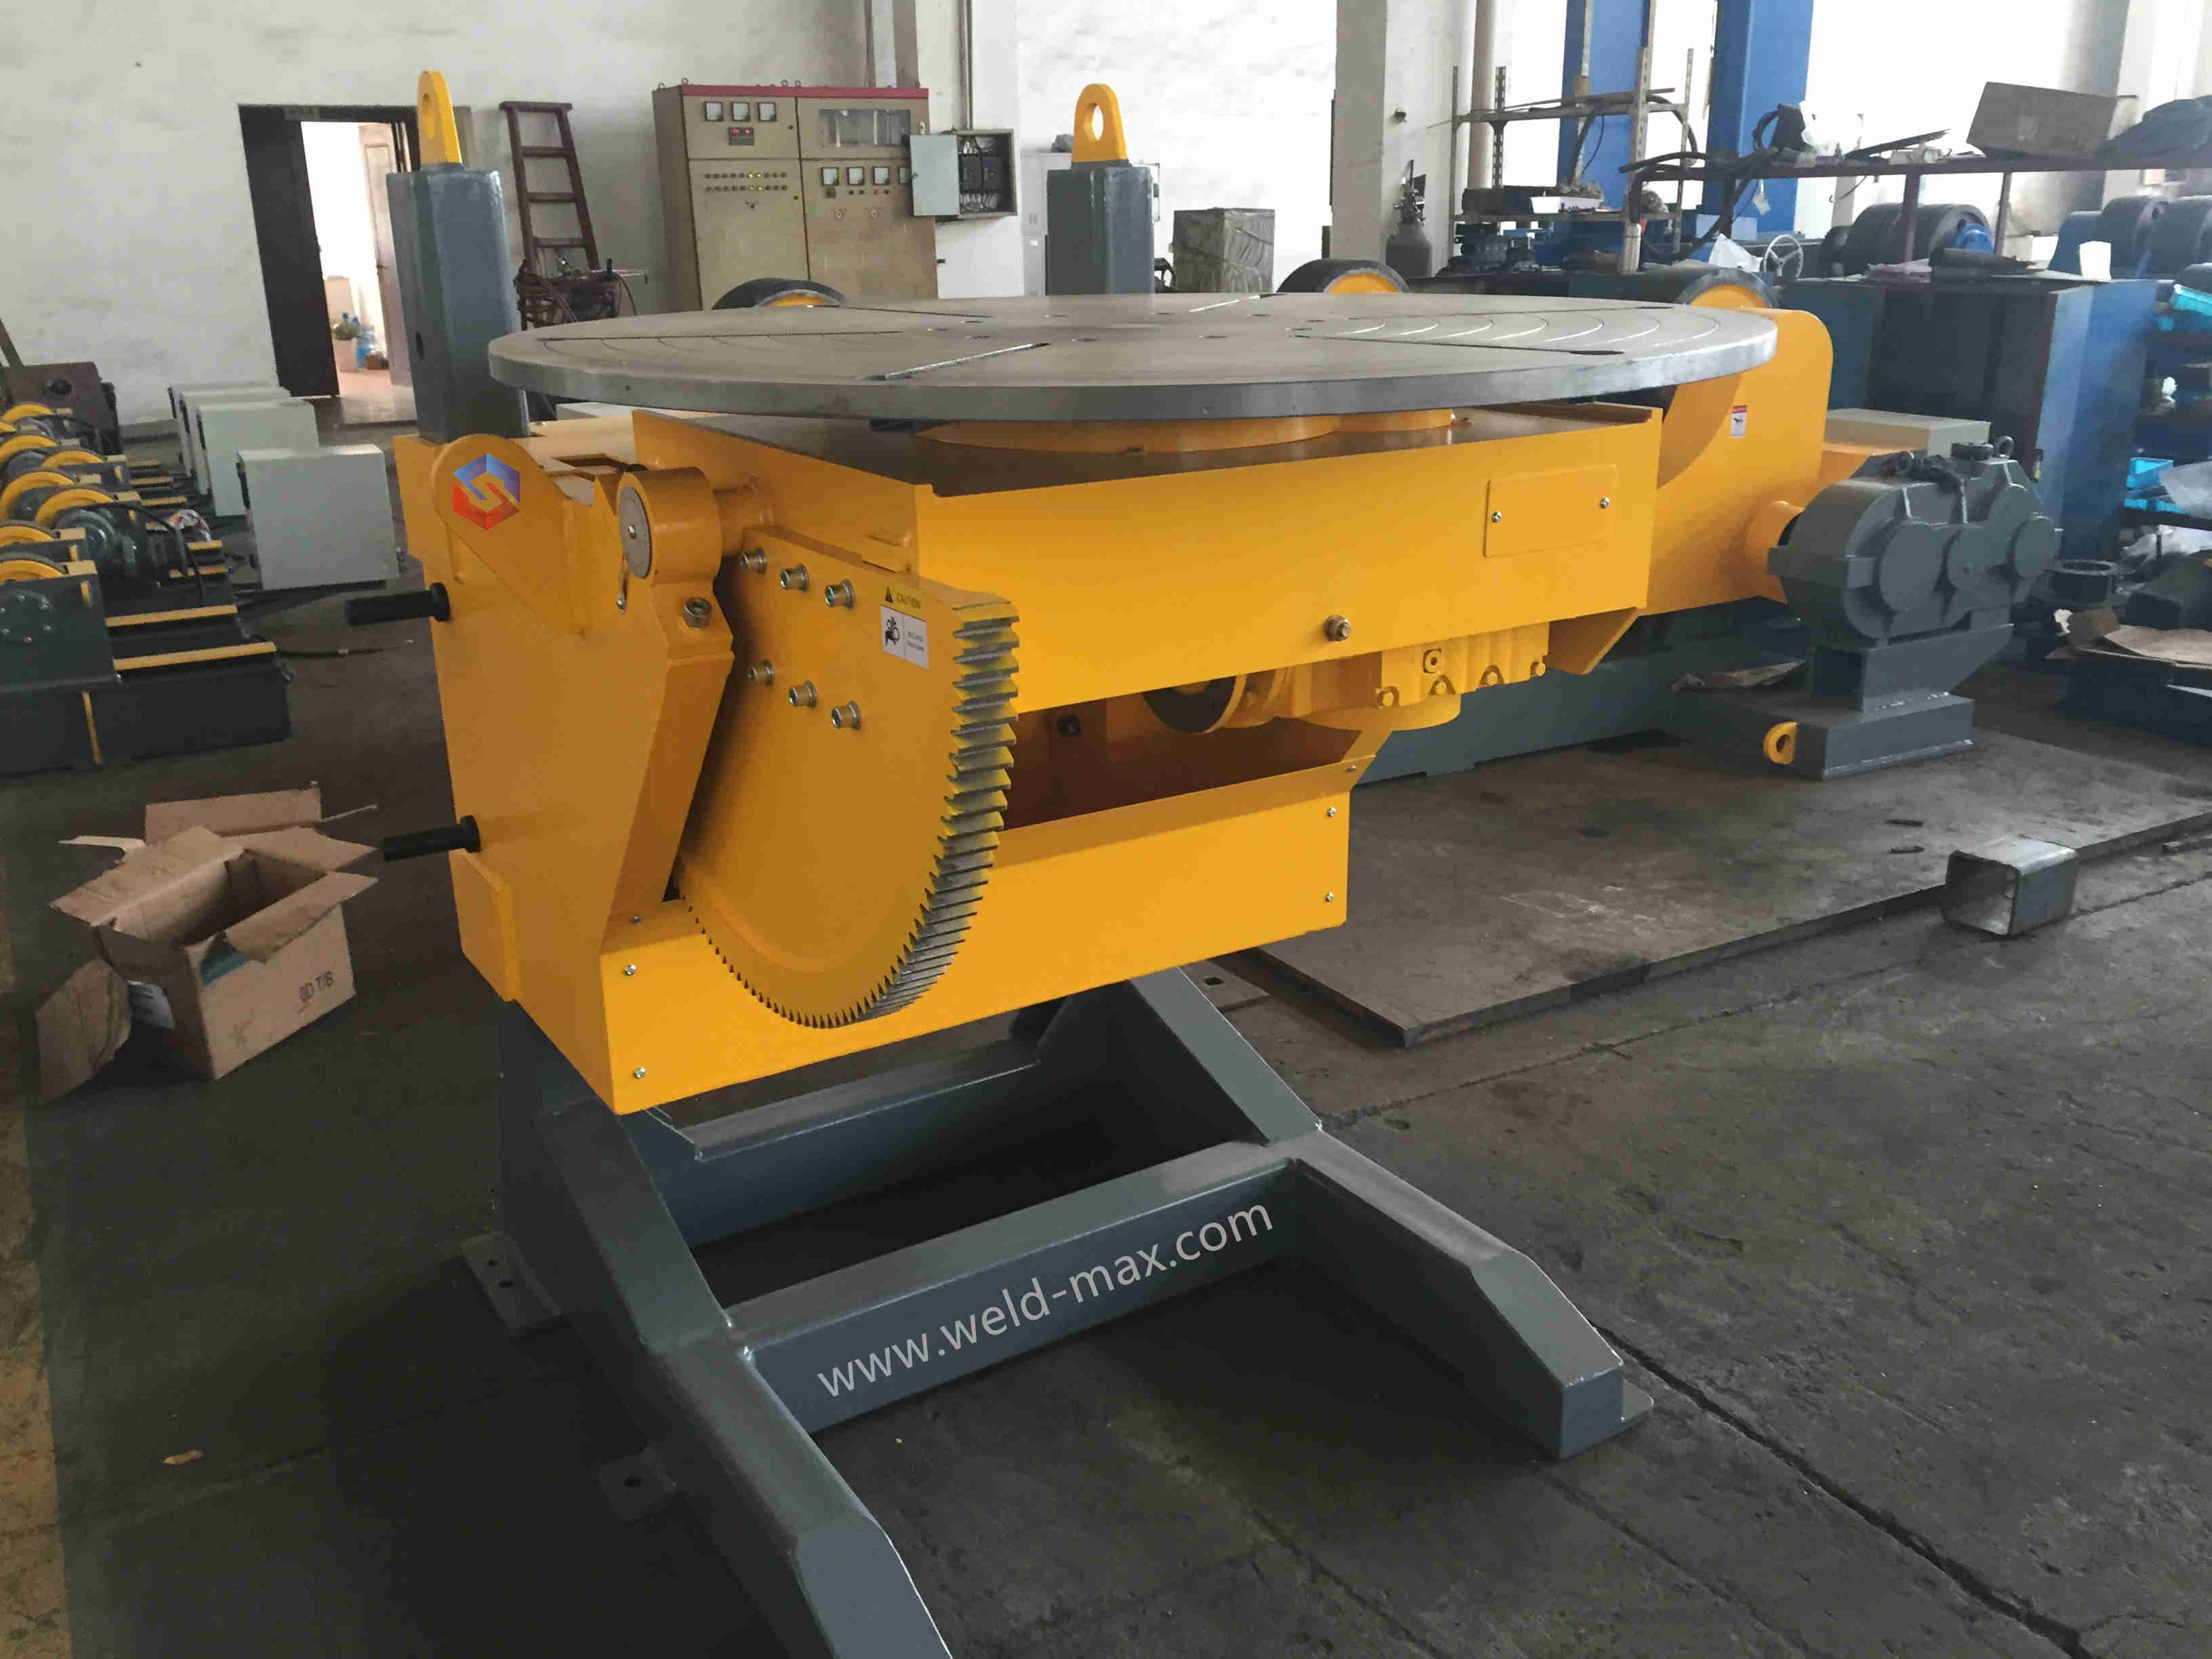 Wholesale Price China Cnc 3 Axis Water Jet Cutting Machinery - 20T Yellow Elevating Welding Positioner With Vertical Turning Table And 5 JAWS Chuck – Sanlian